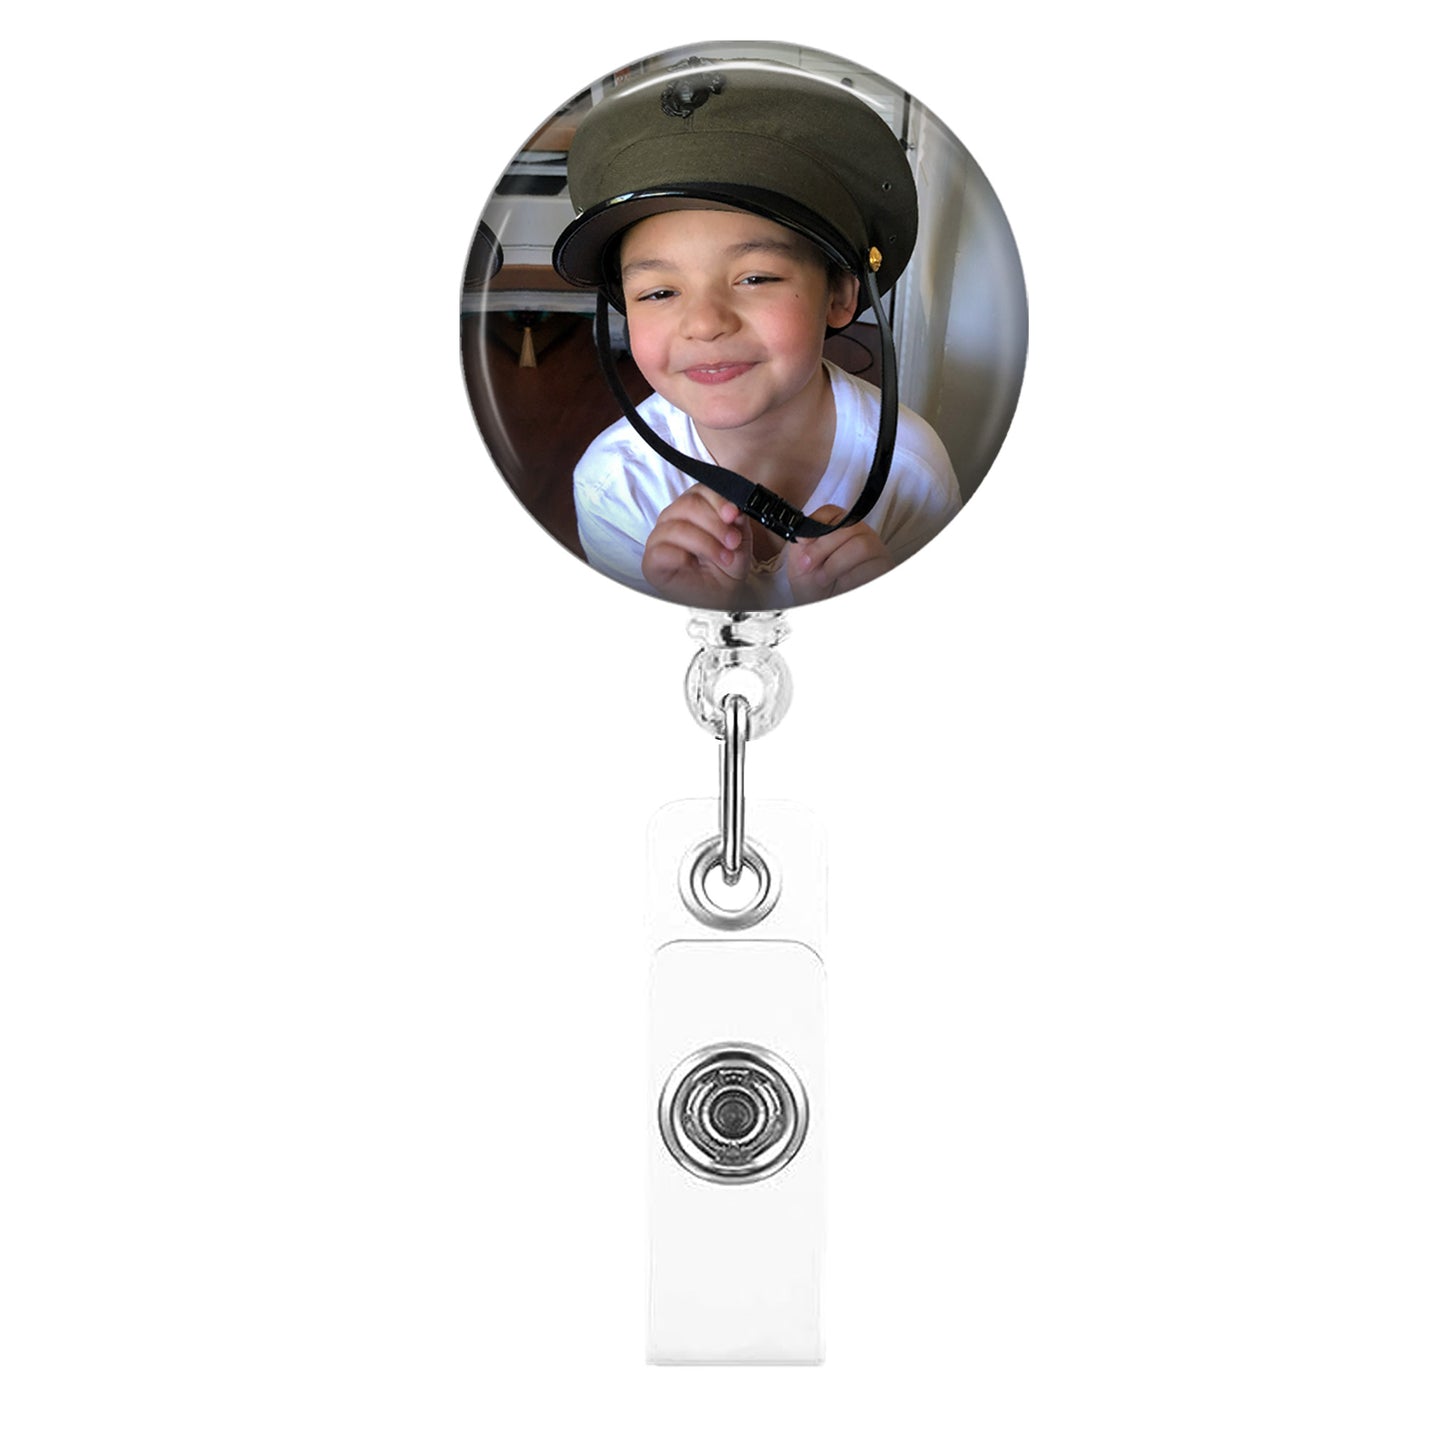 Retractable ID Badge Holder with your Photo - Perfect for Work or Events